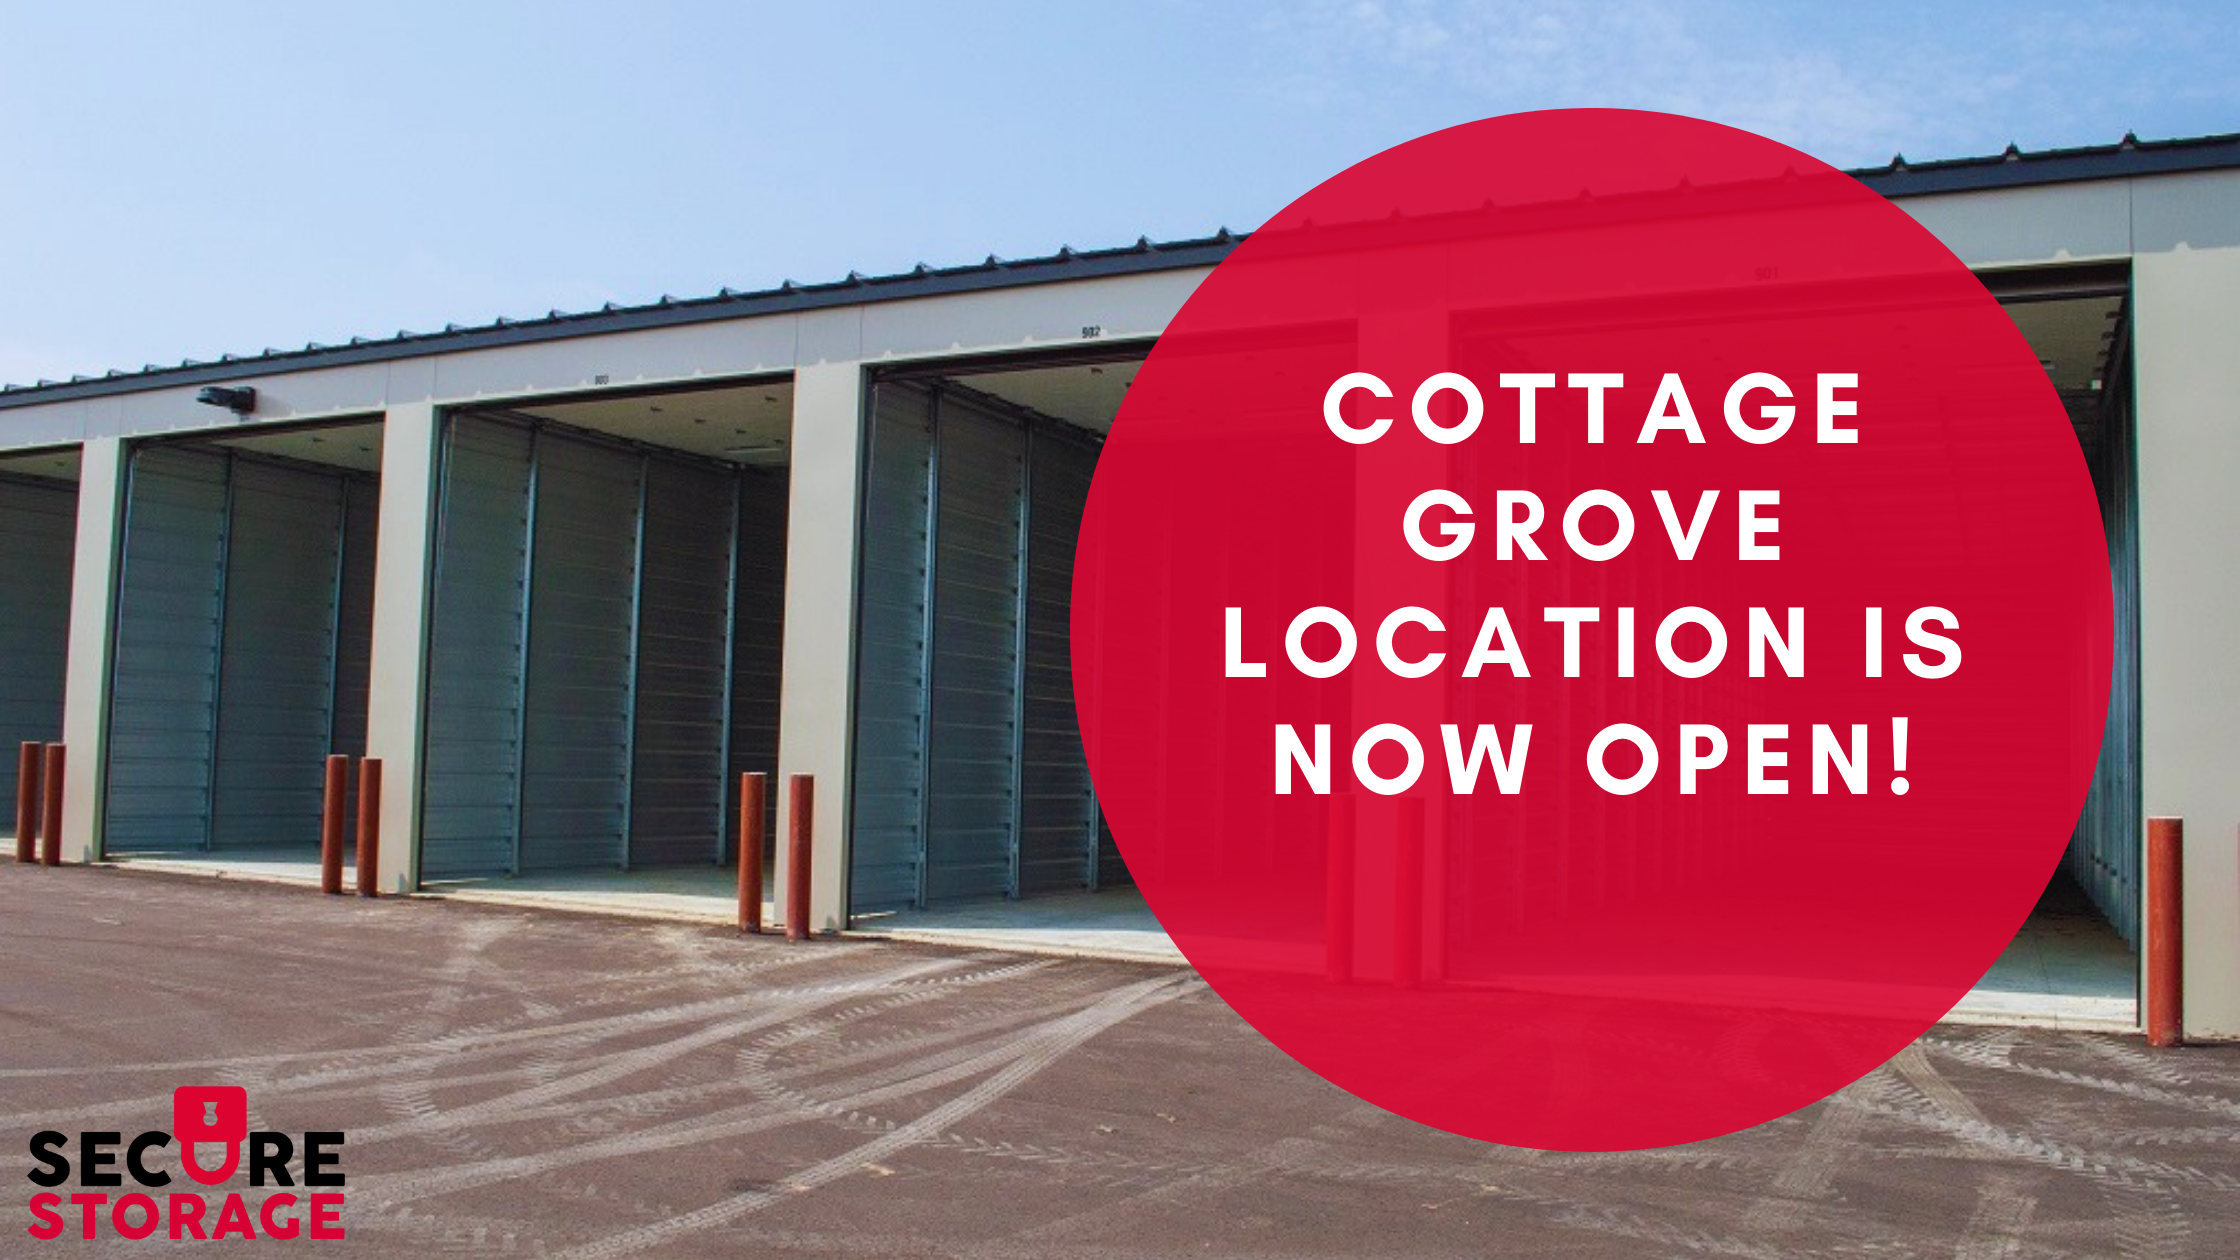 Cottage Grove location is NOW OPEN!